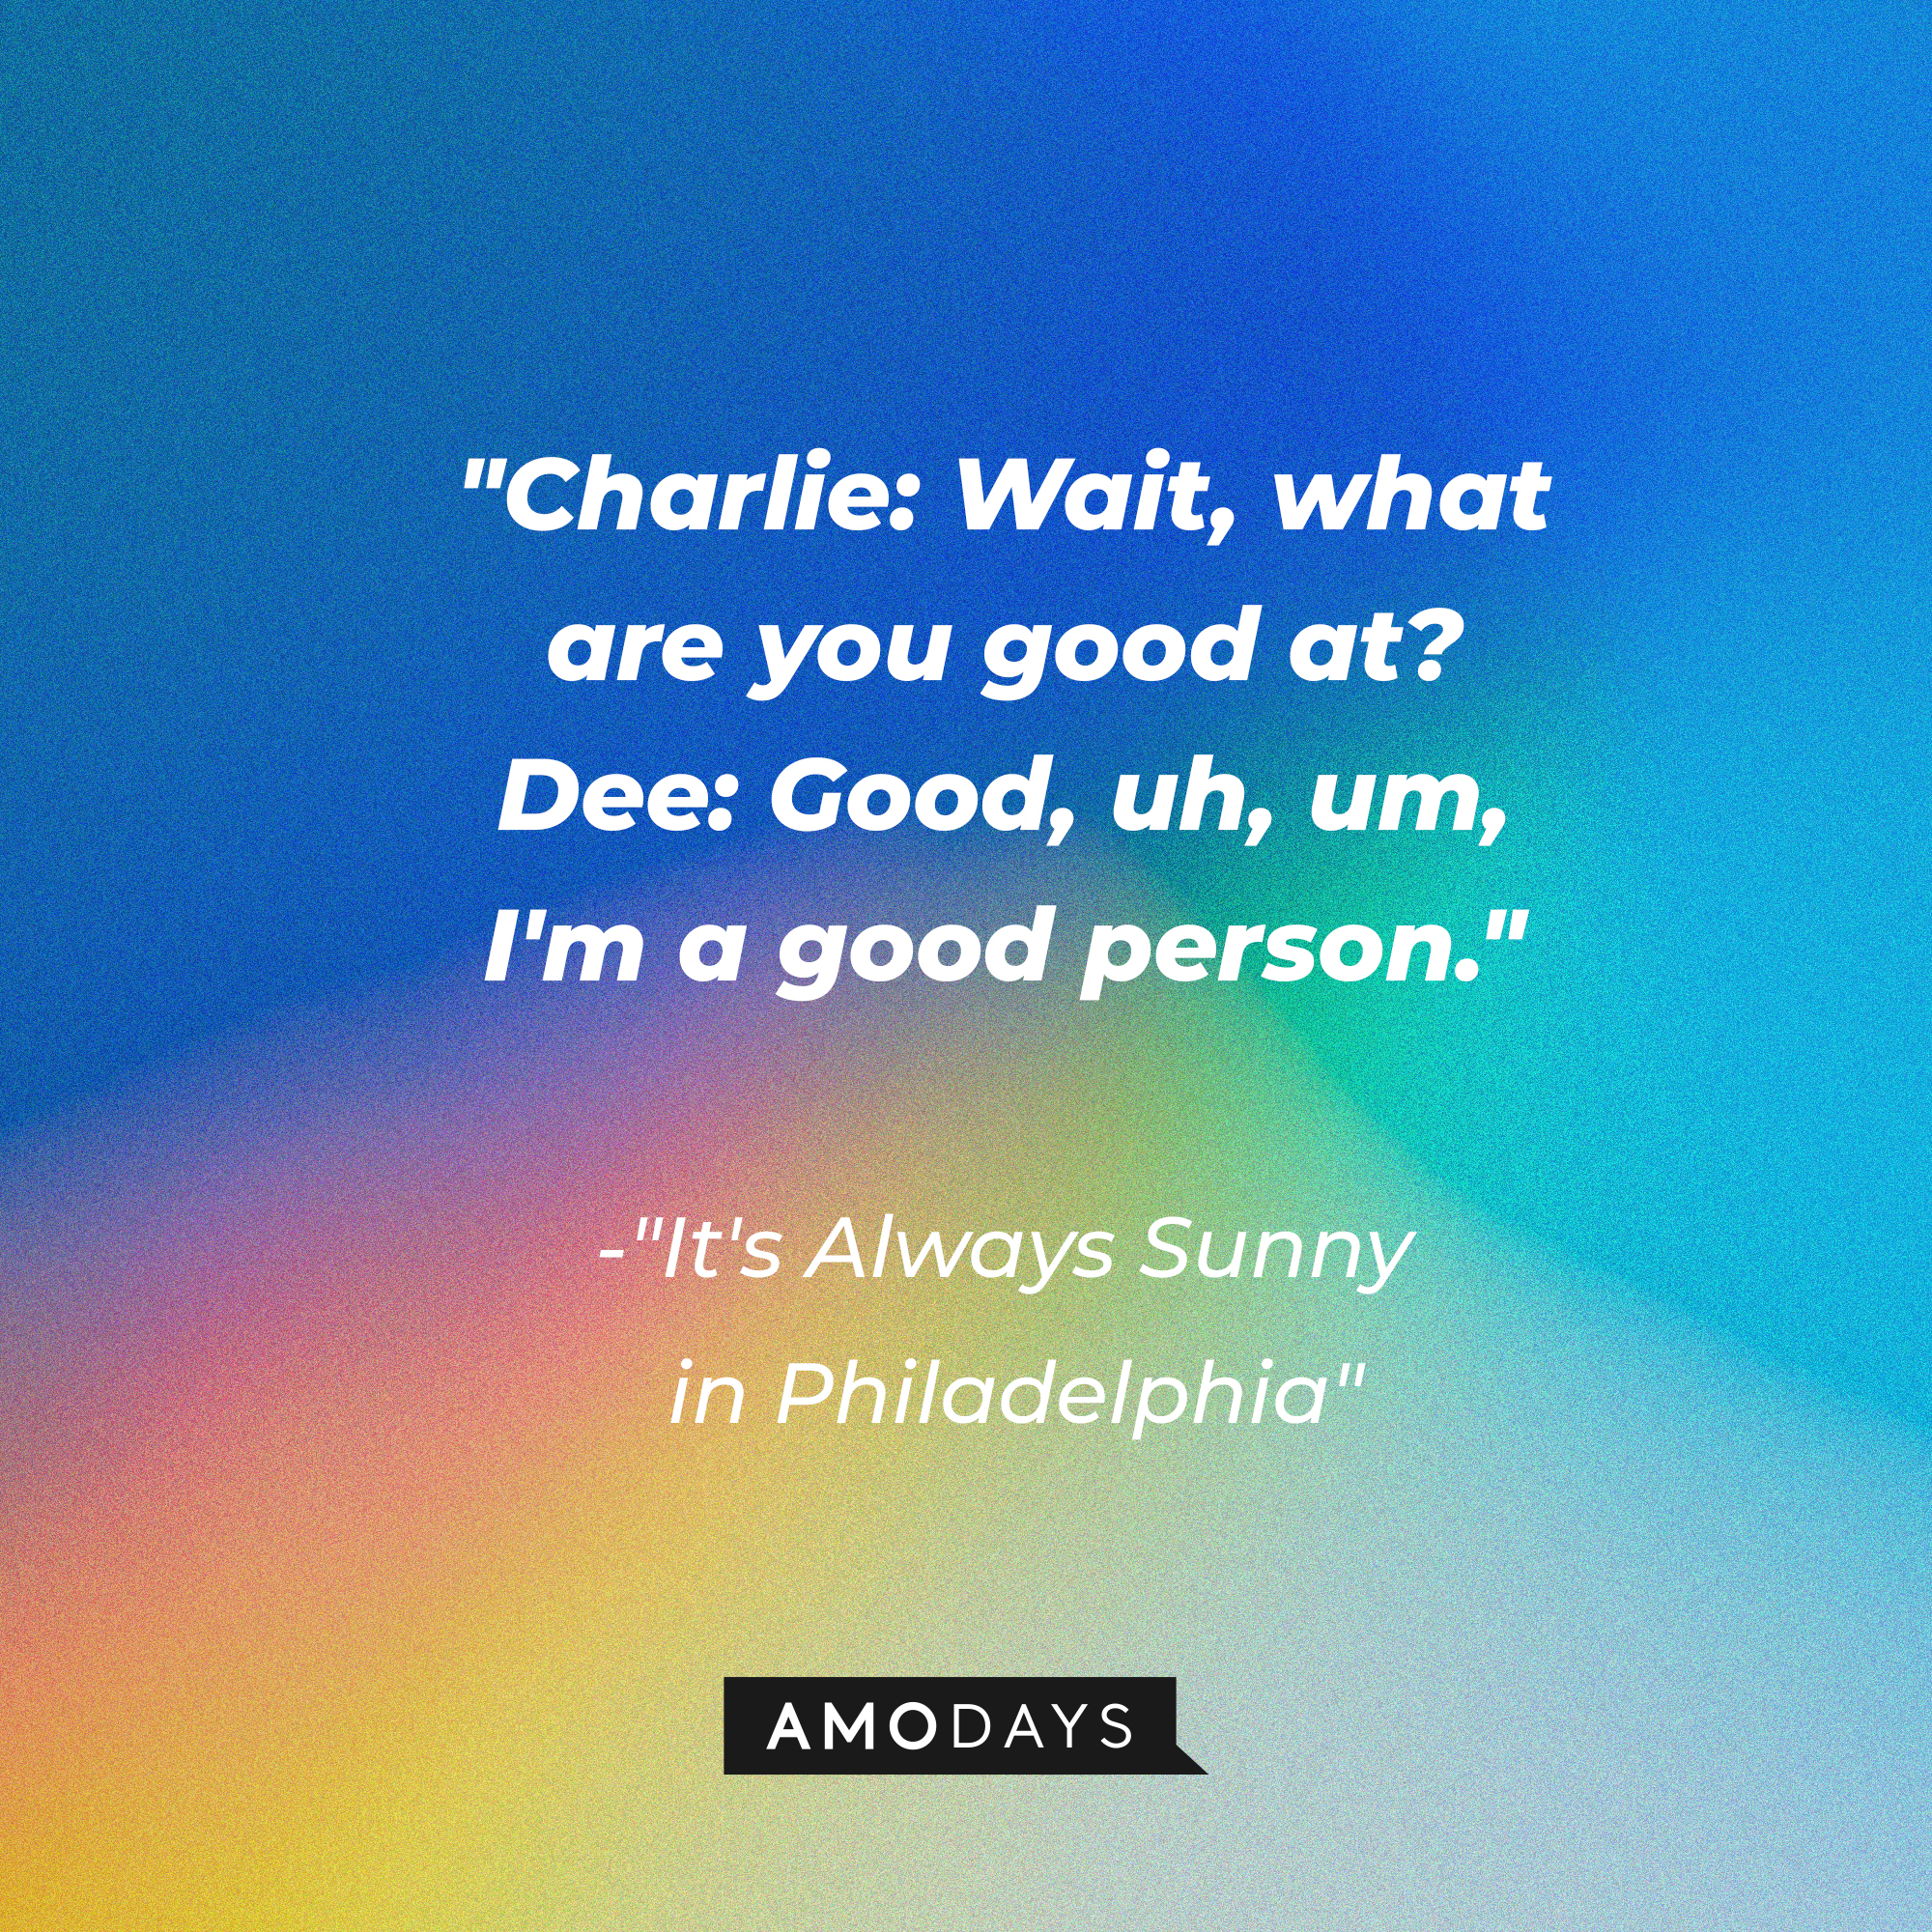 Aphoto with the quote, "Charlie: Wait, what are you good at? Dee: Good, uh, um, I'm a good person." | Source: Amodays